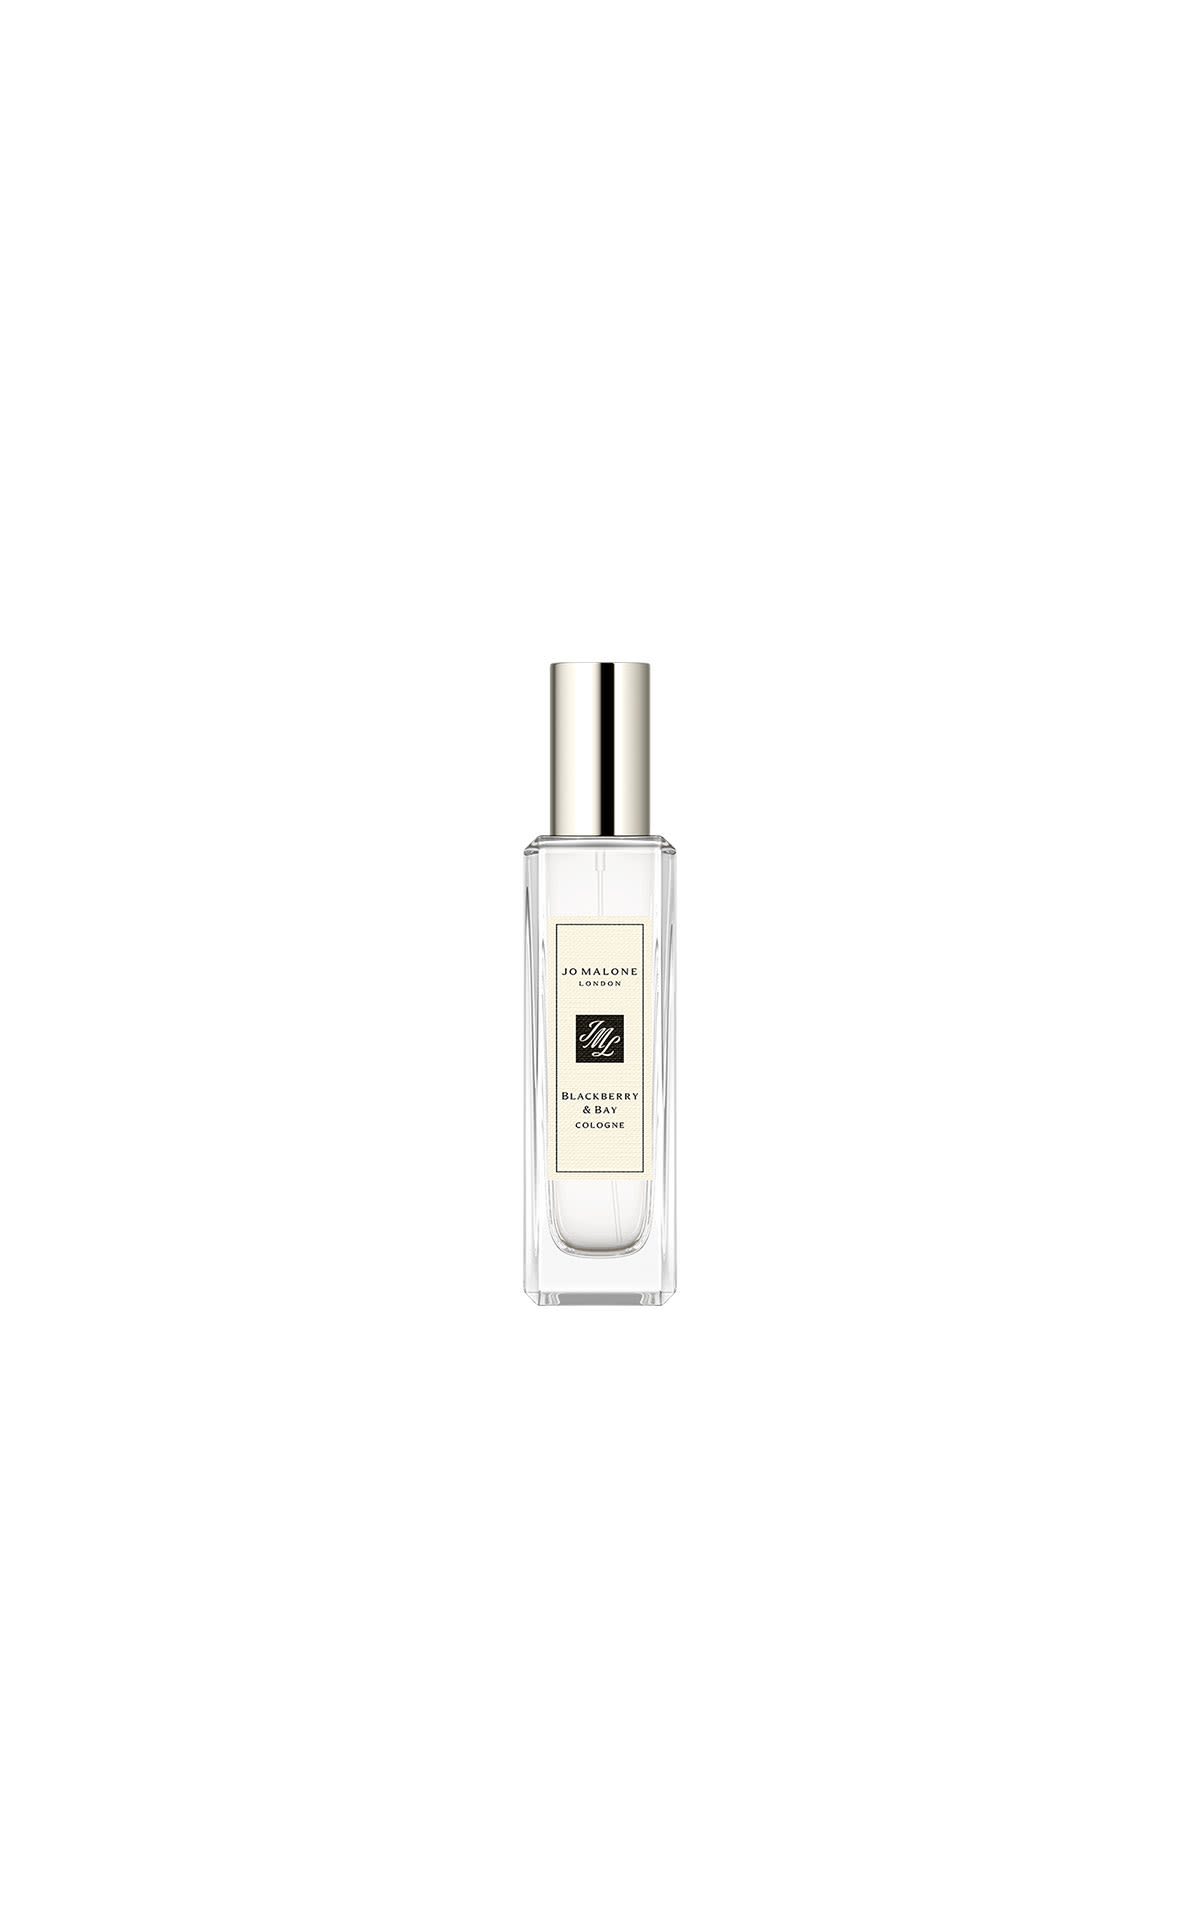 Jo Malone Blackberry and bay cologne 30ml from Bicester Village